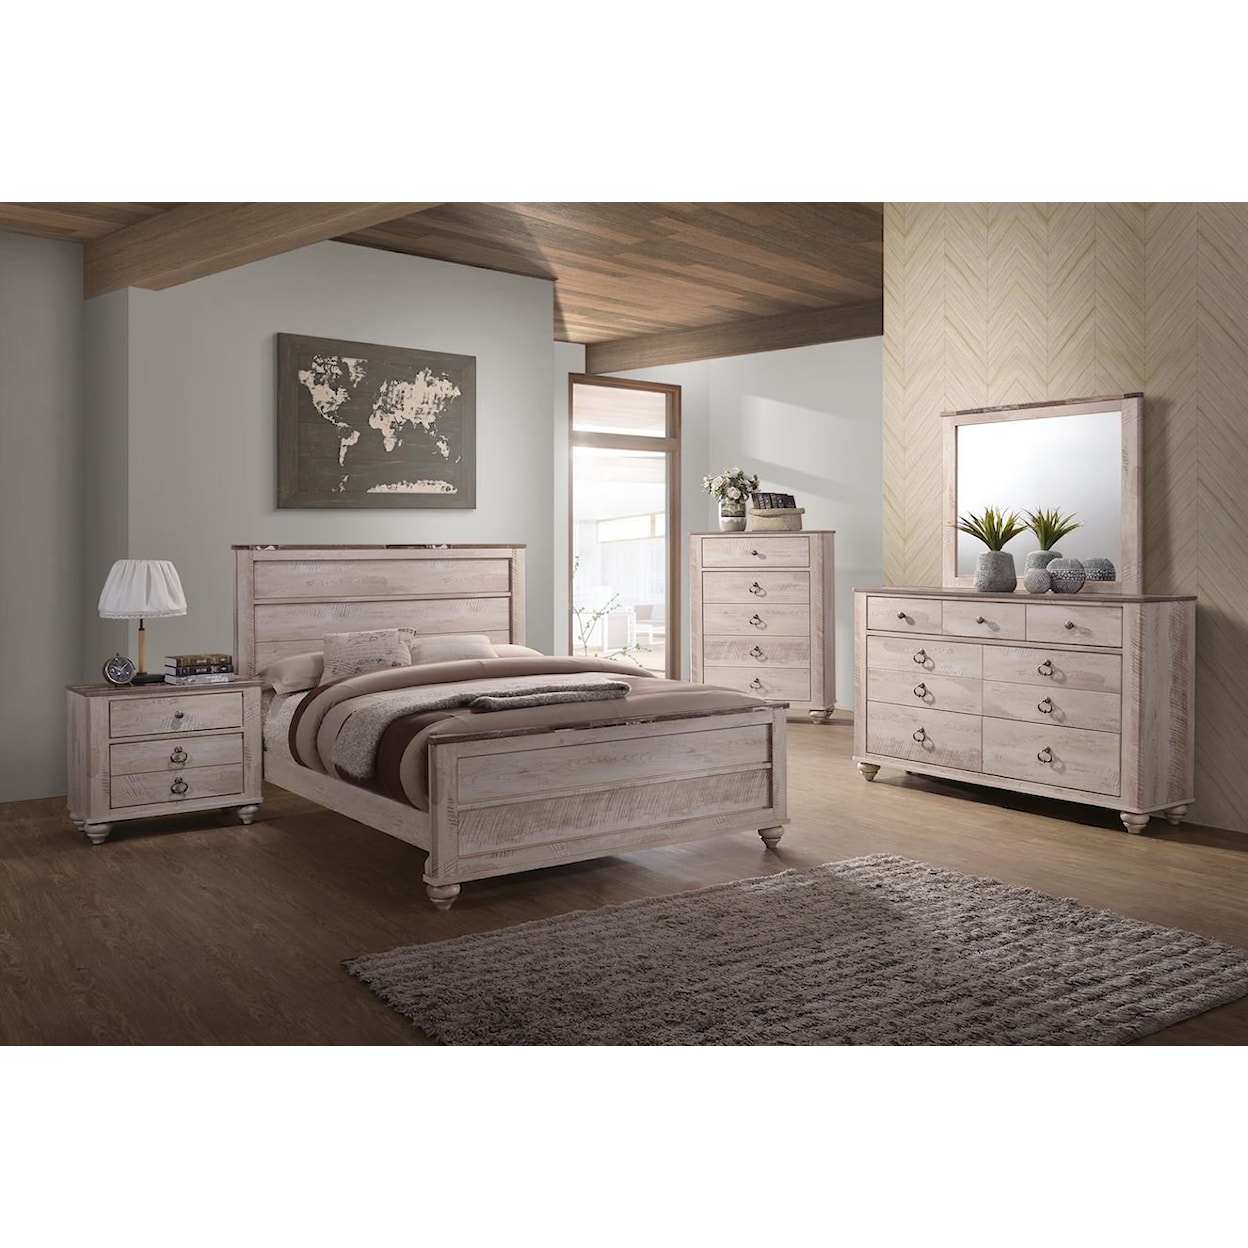 Lifestyle C7302A 6 Piece Full Bedroom Group